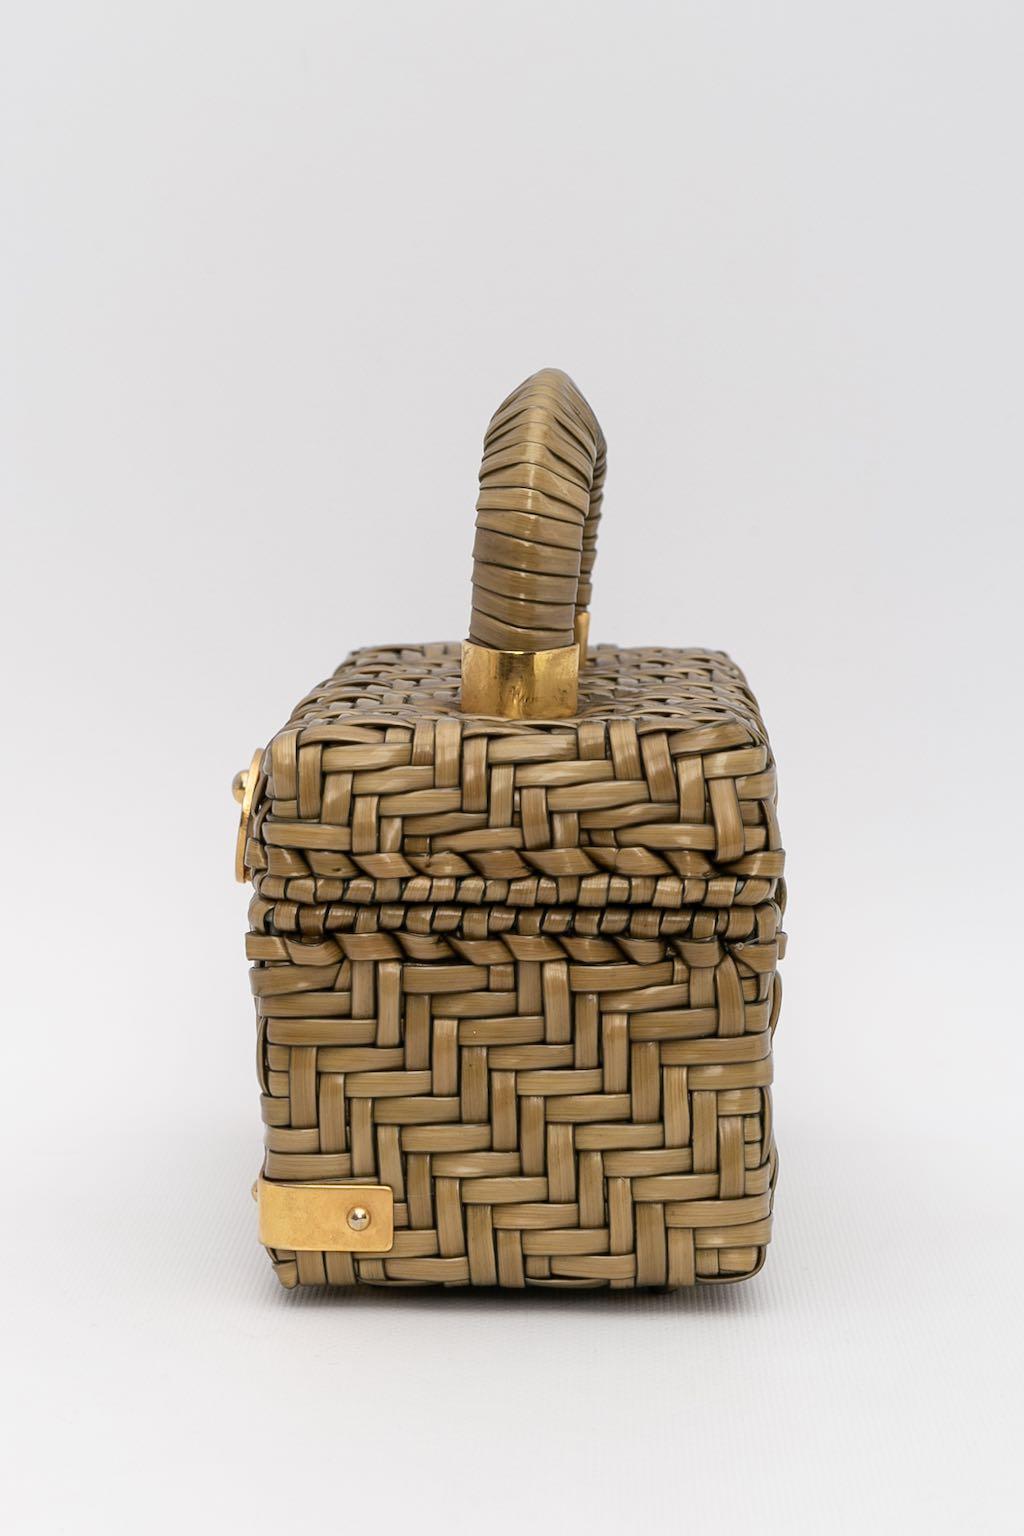 Lesco Lana (Made in Hong Kong) Rigid bag made of laminated wicker in a bronze color.

Additional information: 

Dimensions: 
Height: 11 cm (4.33 in), Width: 20 cm (7.87 in), Depth: 10 cm (3.94 in), Handle: 22.5 cm (8.86 in)

Condition: 
Very good